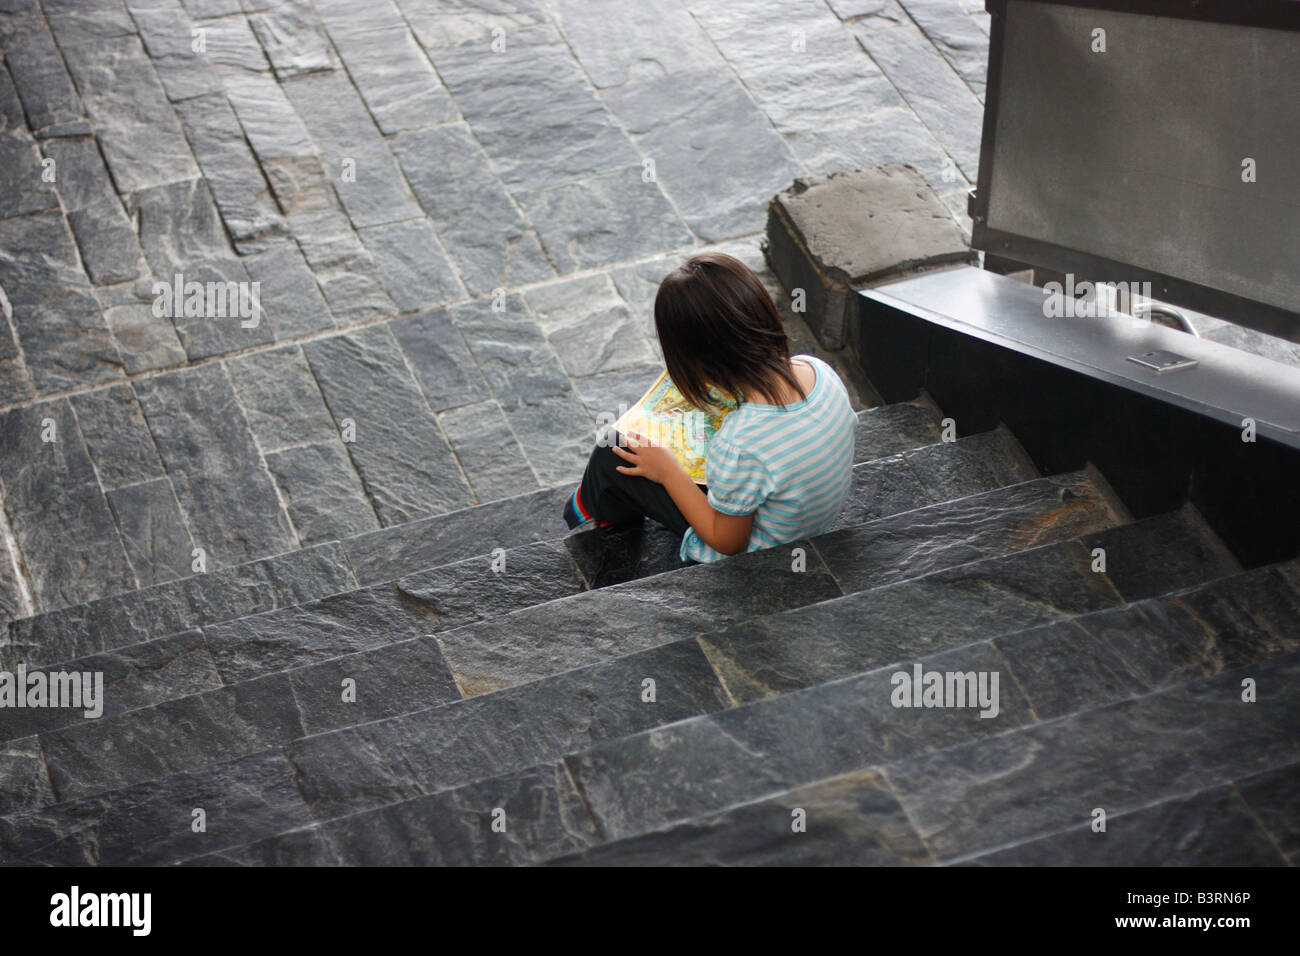 Four year old girl sitting on the stairs reading a map at an aquarium. Stock Photo